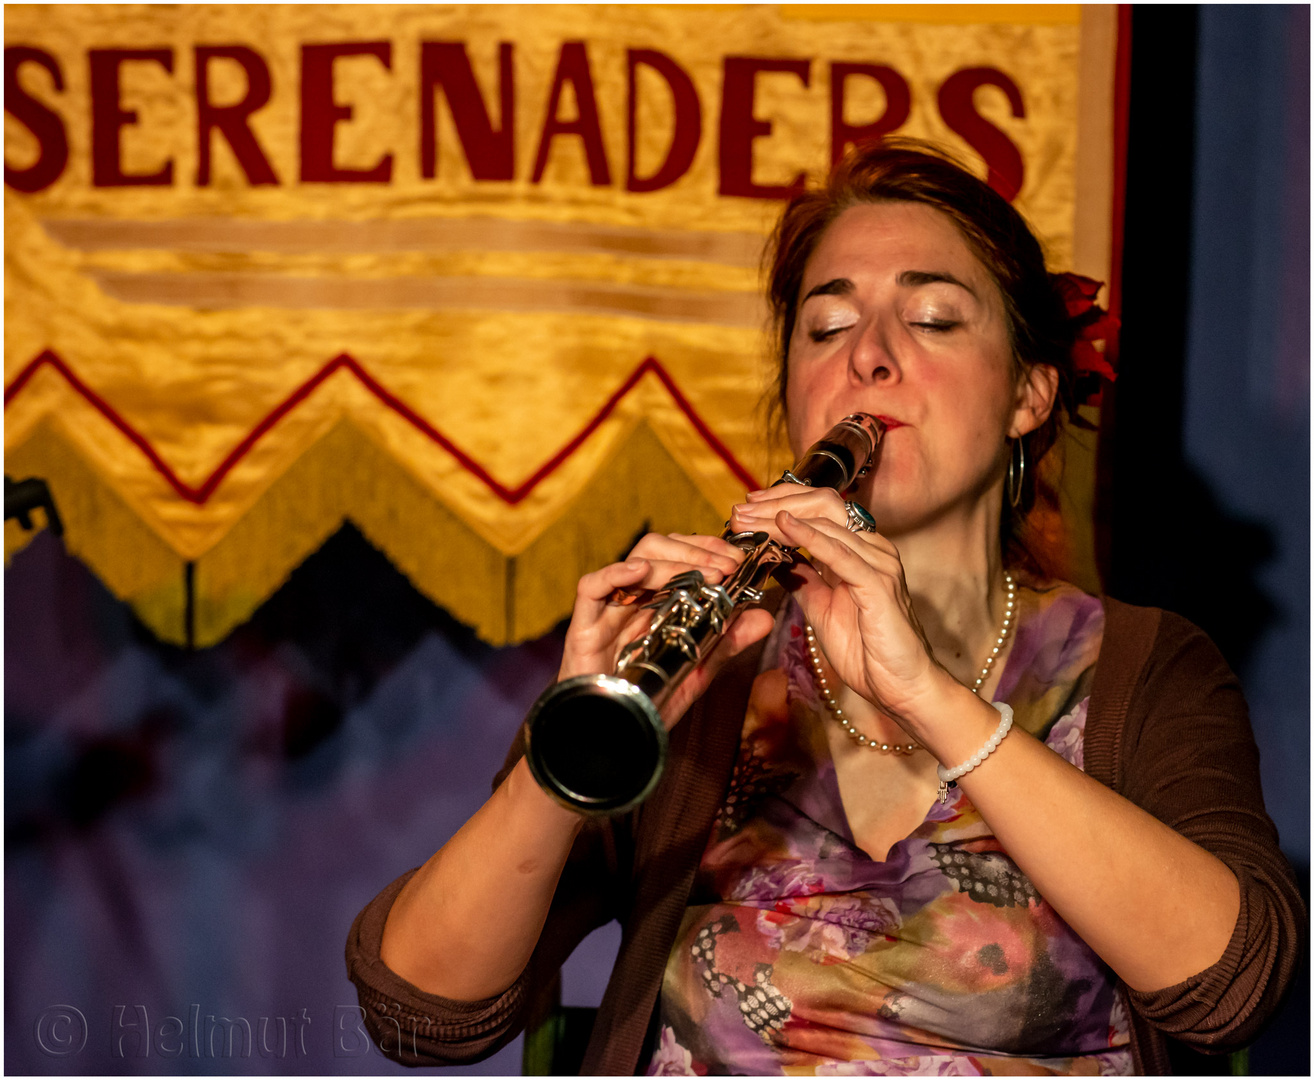 The Red Hot Serenaders